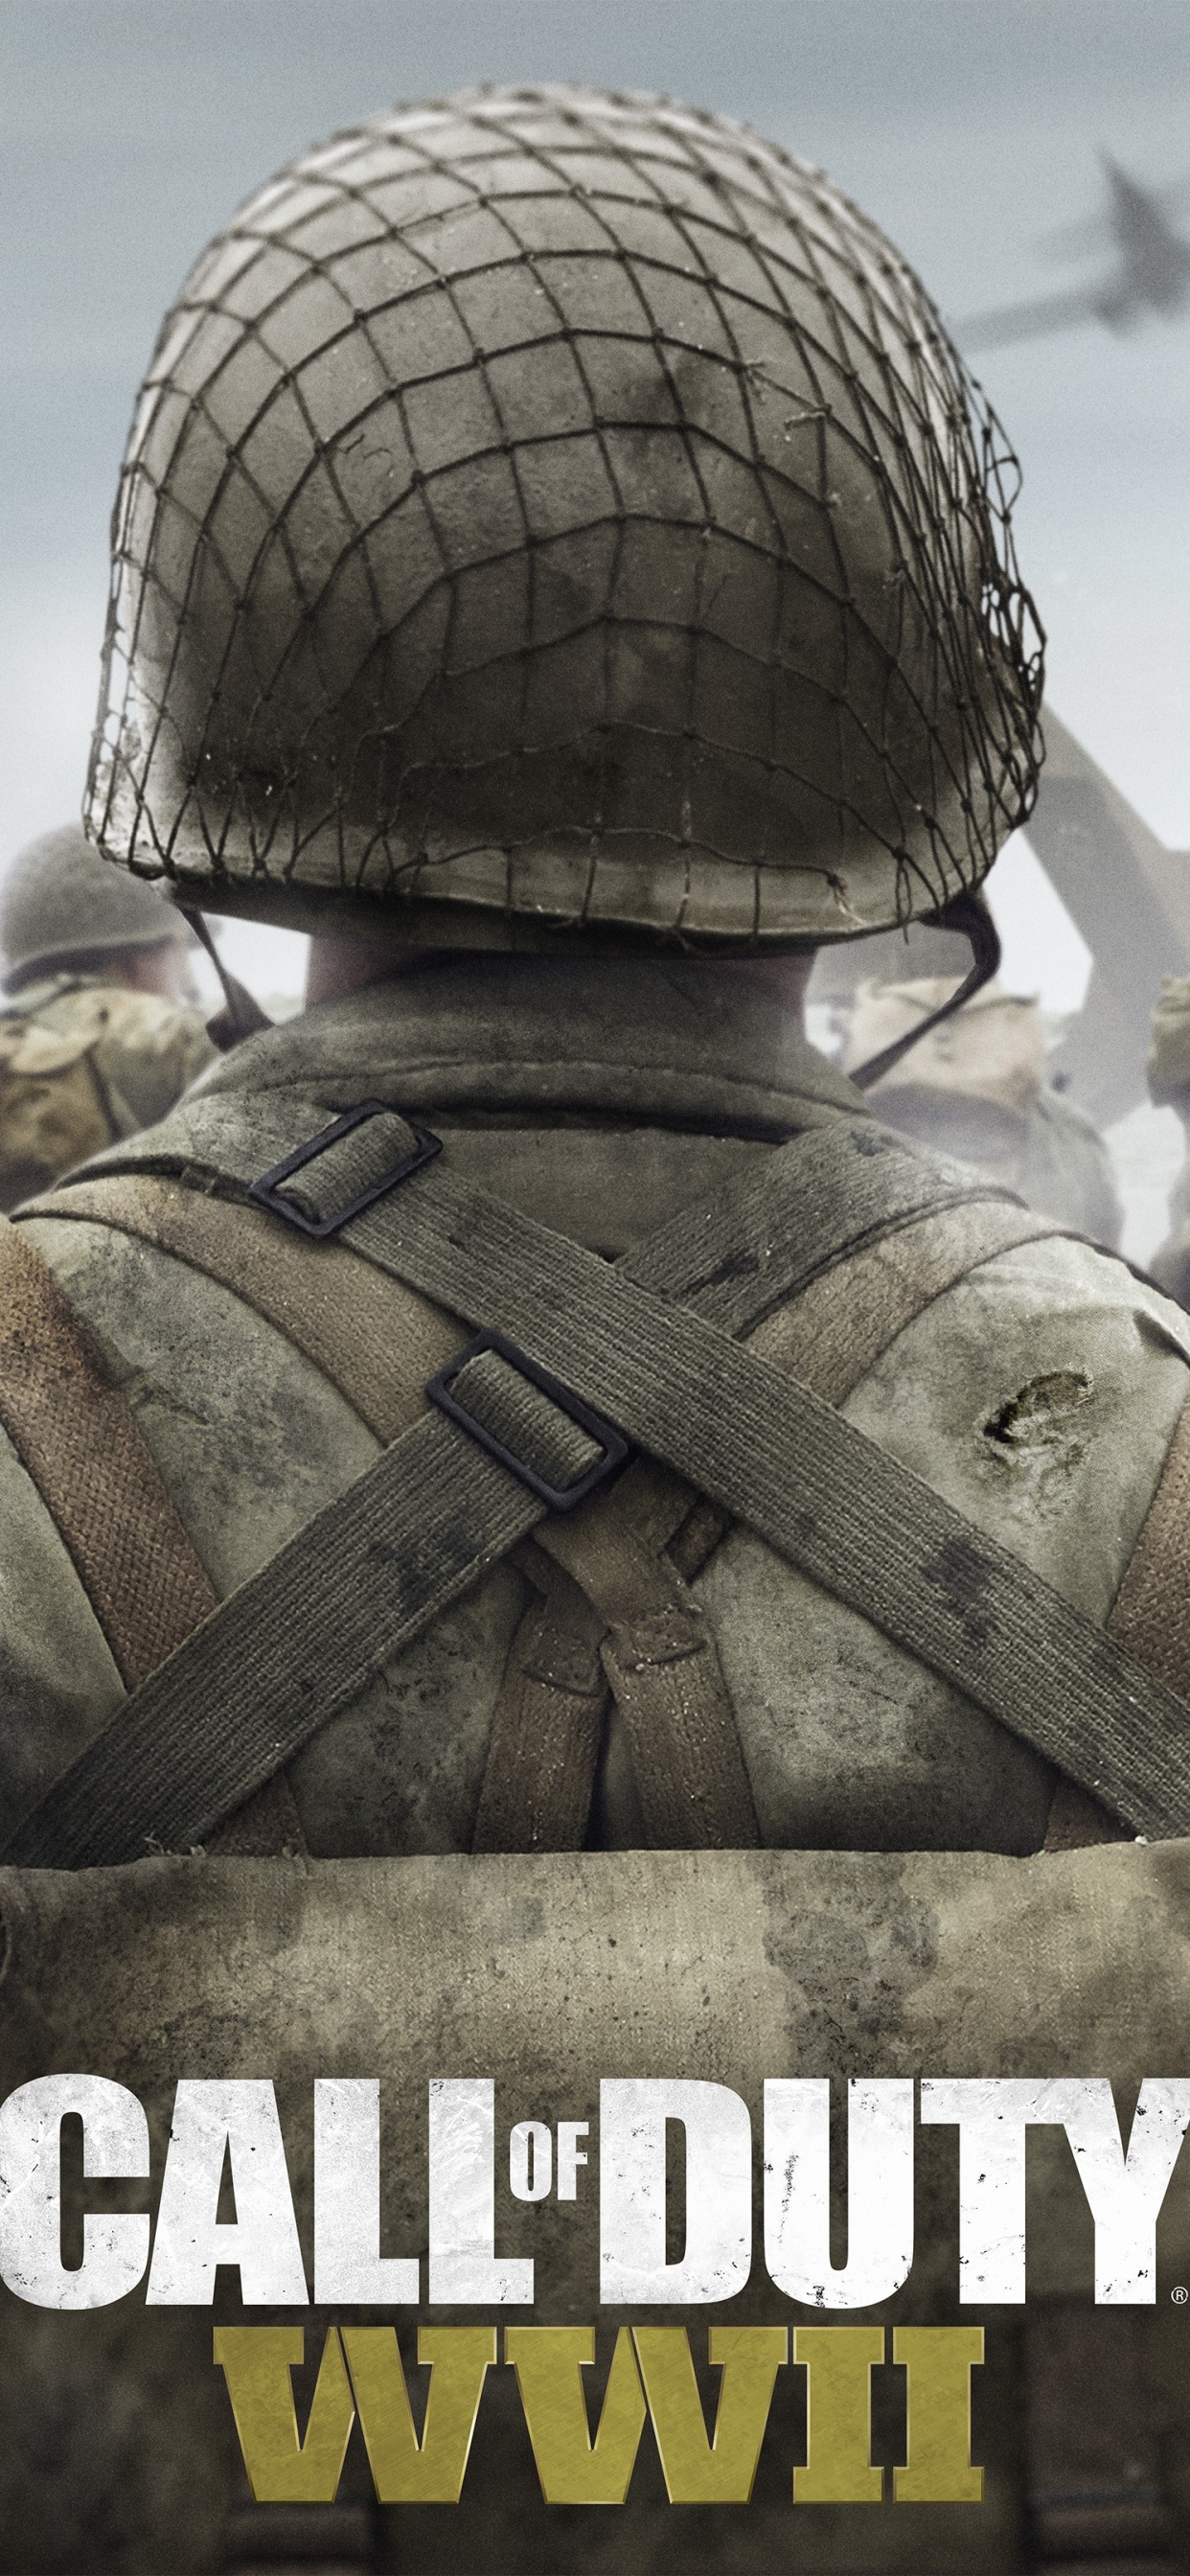 Call of Duty Ww2, Call of Duty WWII, Activision, Sledgehammer Games, Soldat. Wallpaper in 1242x2688 Resolution